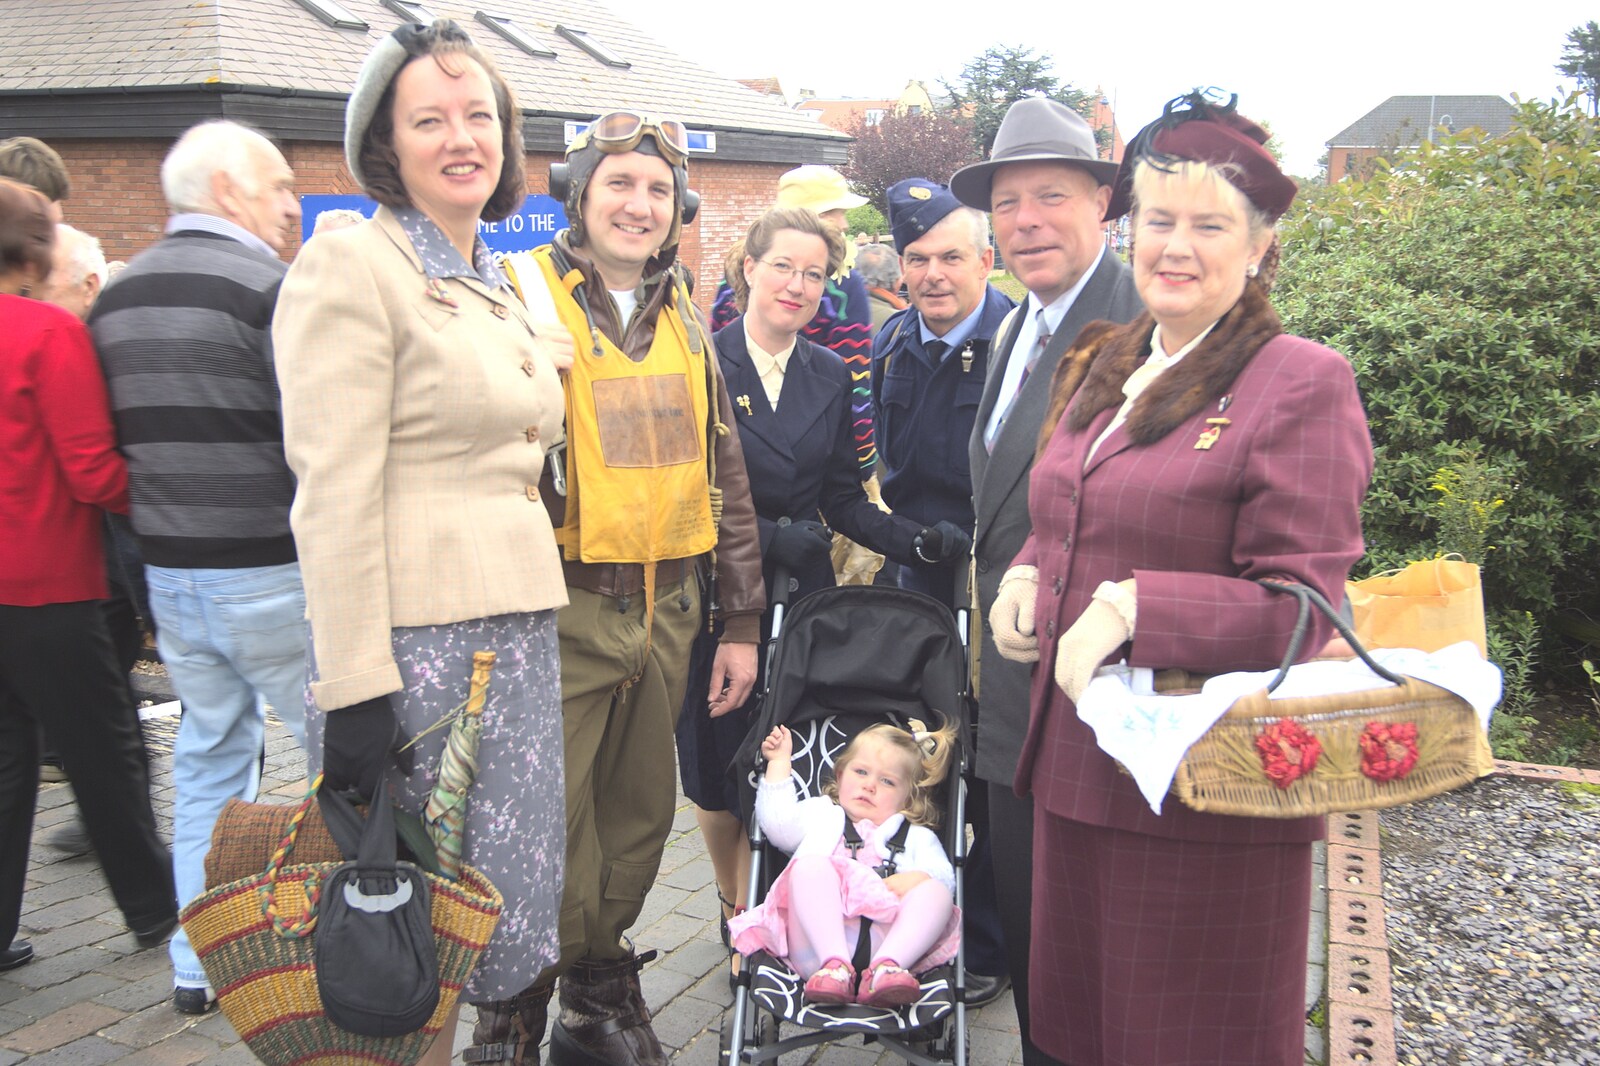 Clive and Suzanne's friends gather for a photo from A 1940s Steam Weekend, Holt and Sheringham, Norfolk - 18th September 2010